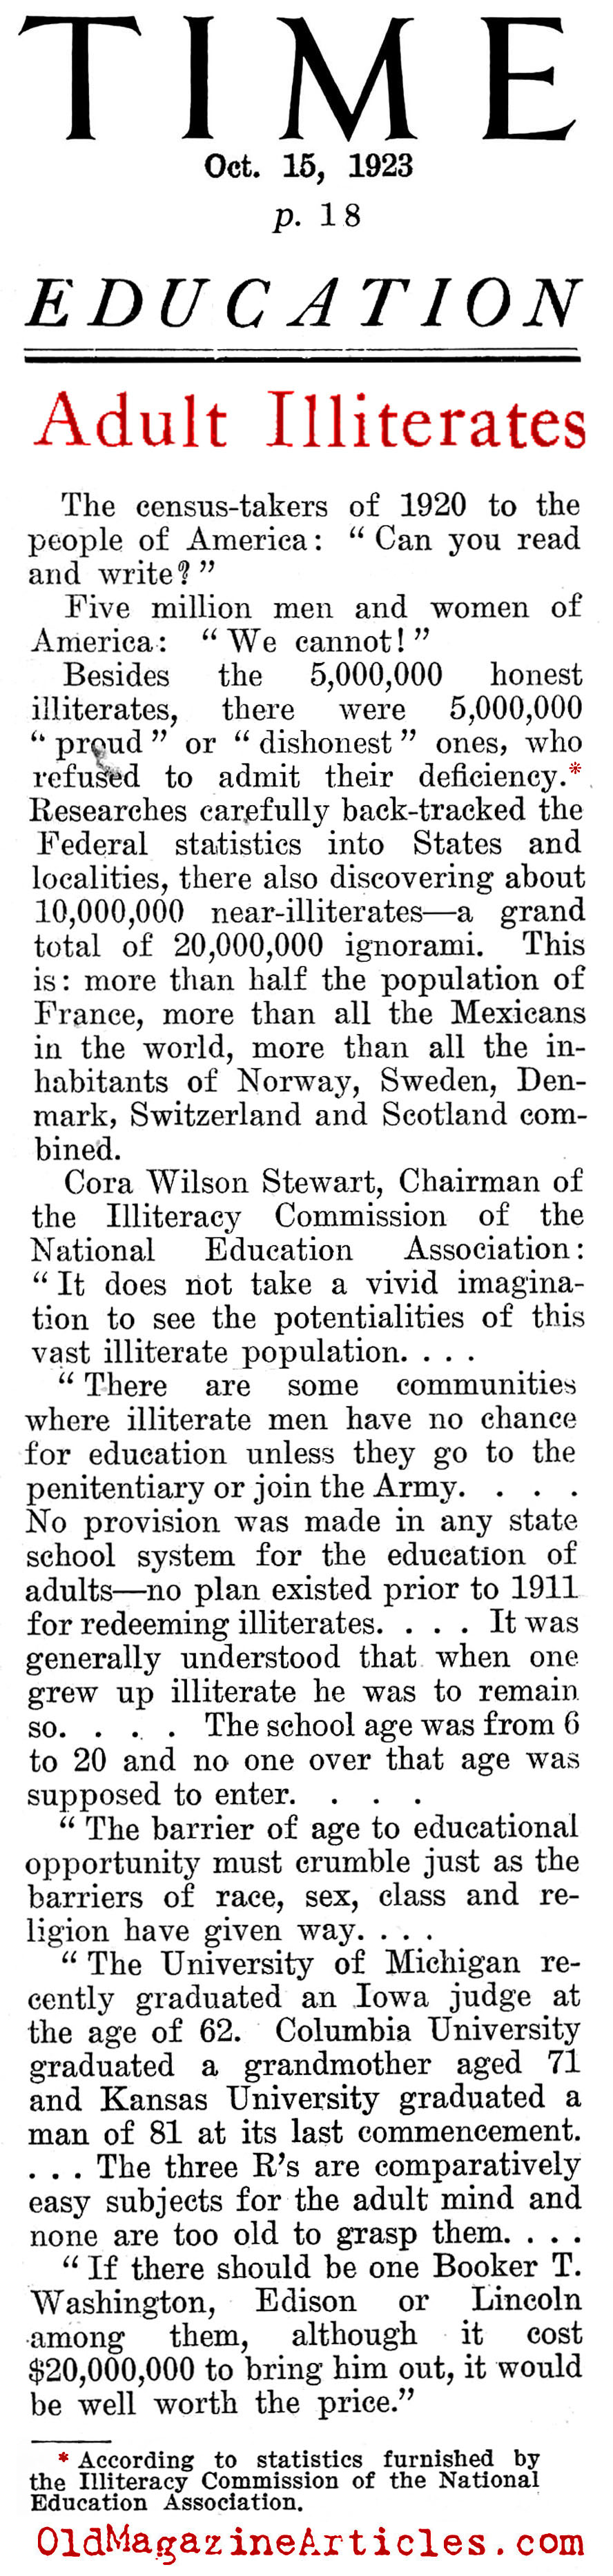 American Illiteracy in 1920 (Time Magazine, 1923)